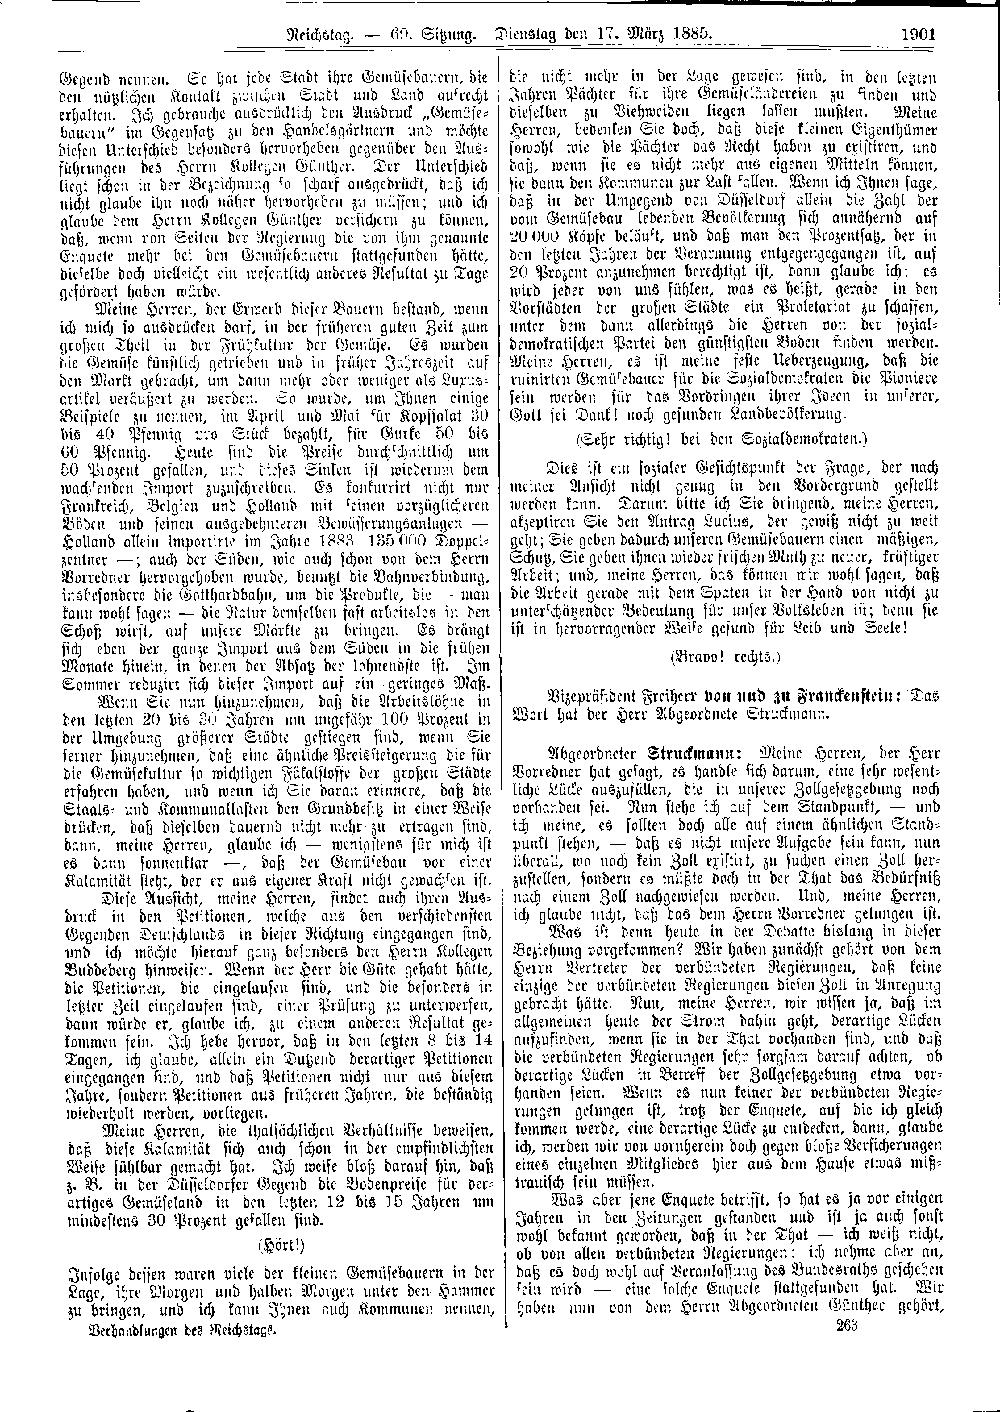 Scan of page 1901